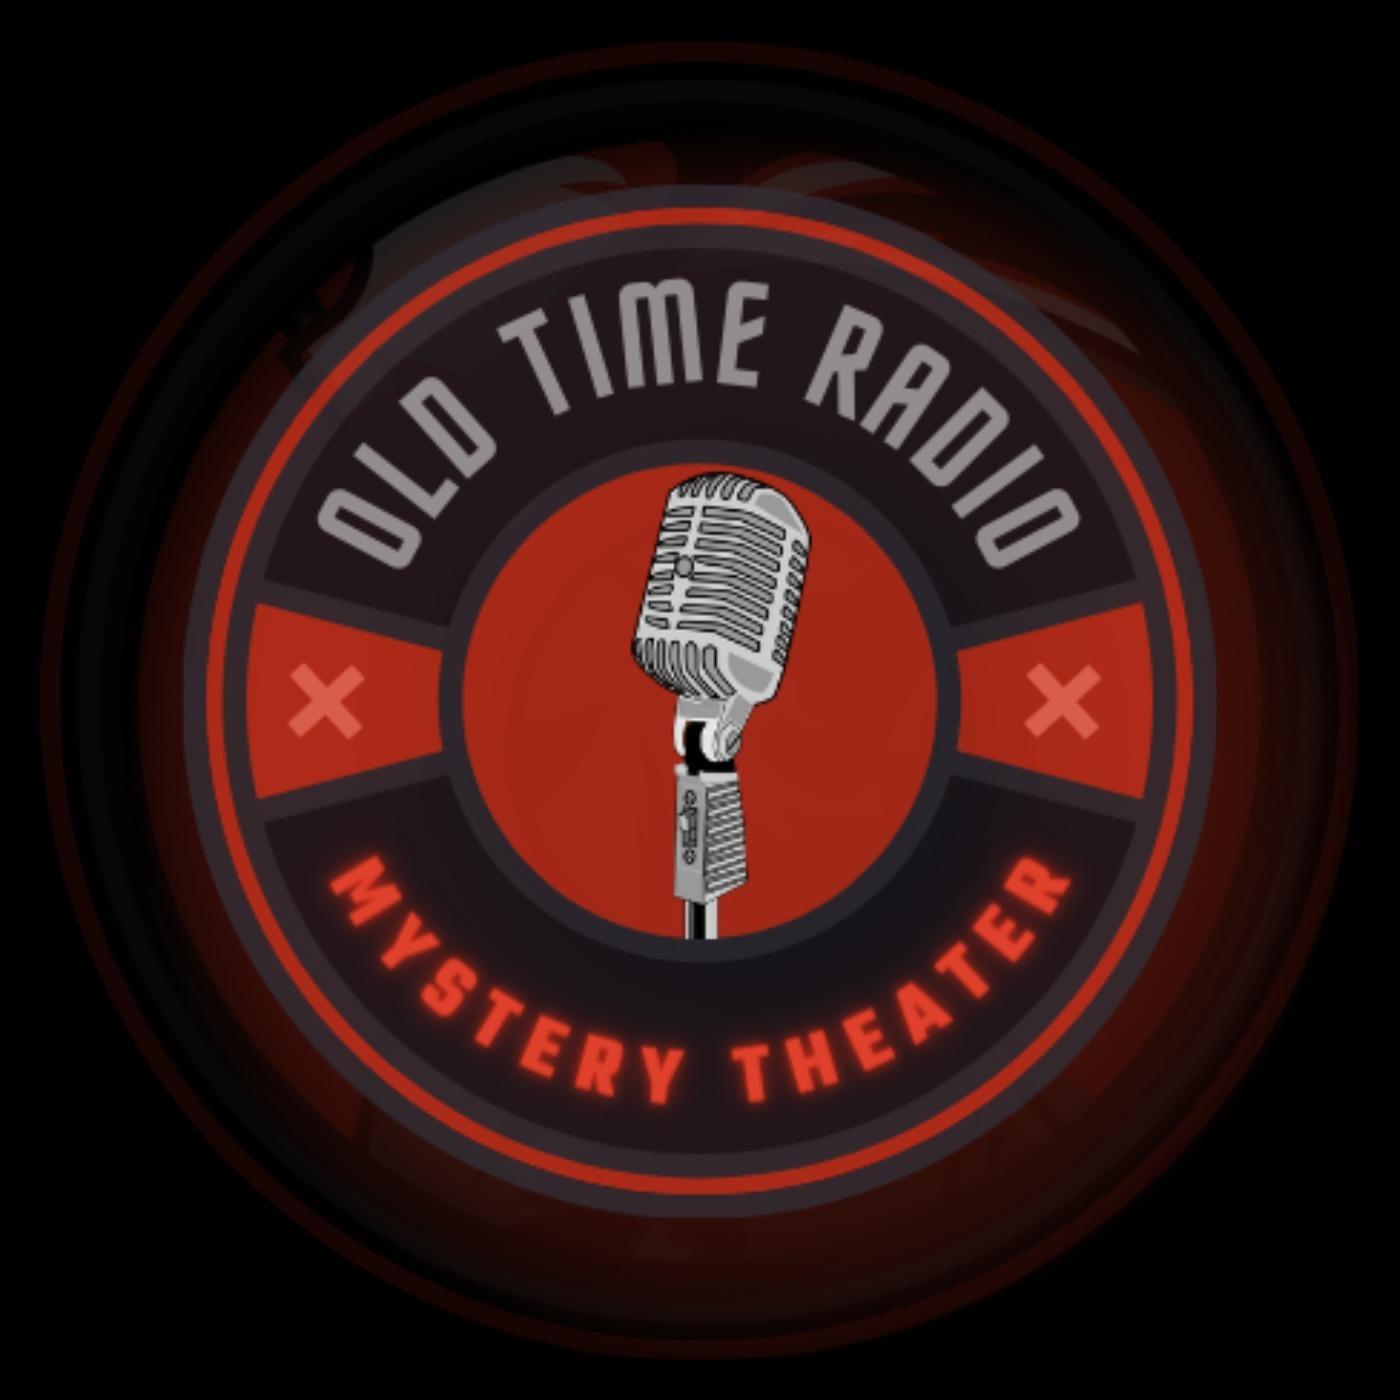 Mystery Theater Old Time Radio 